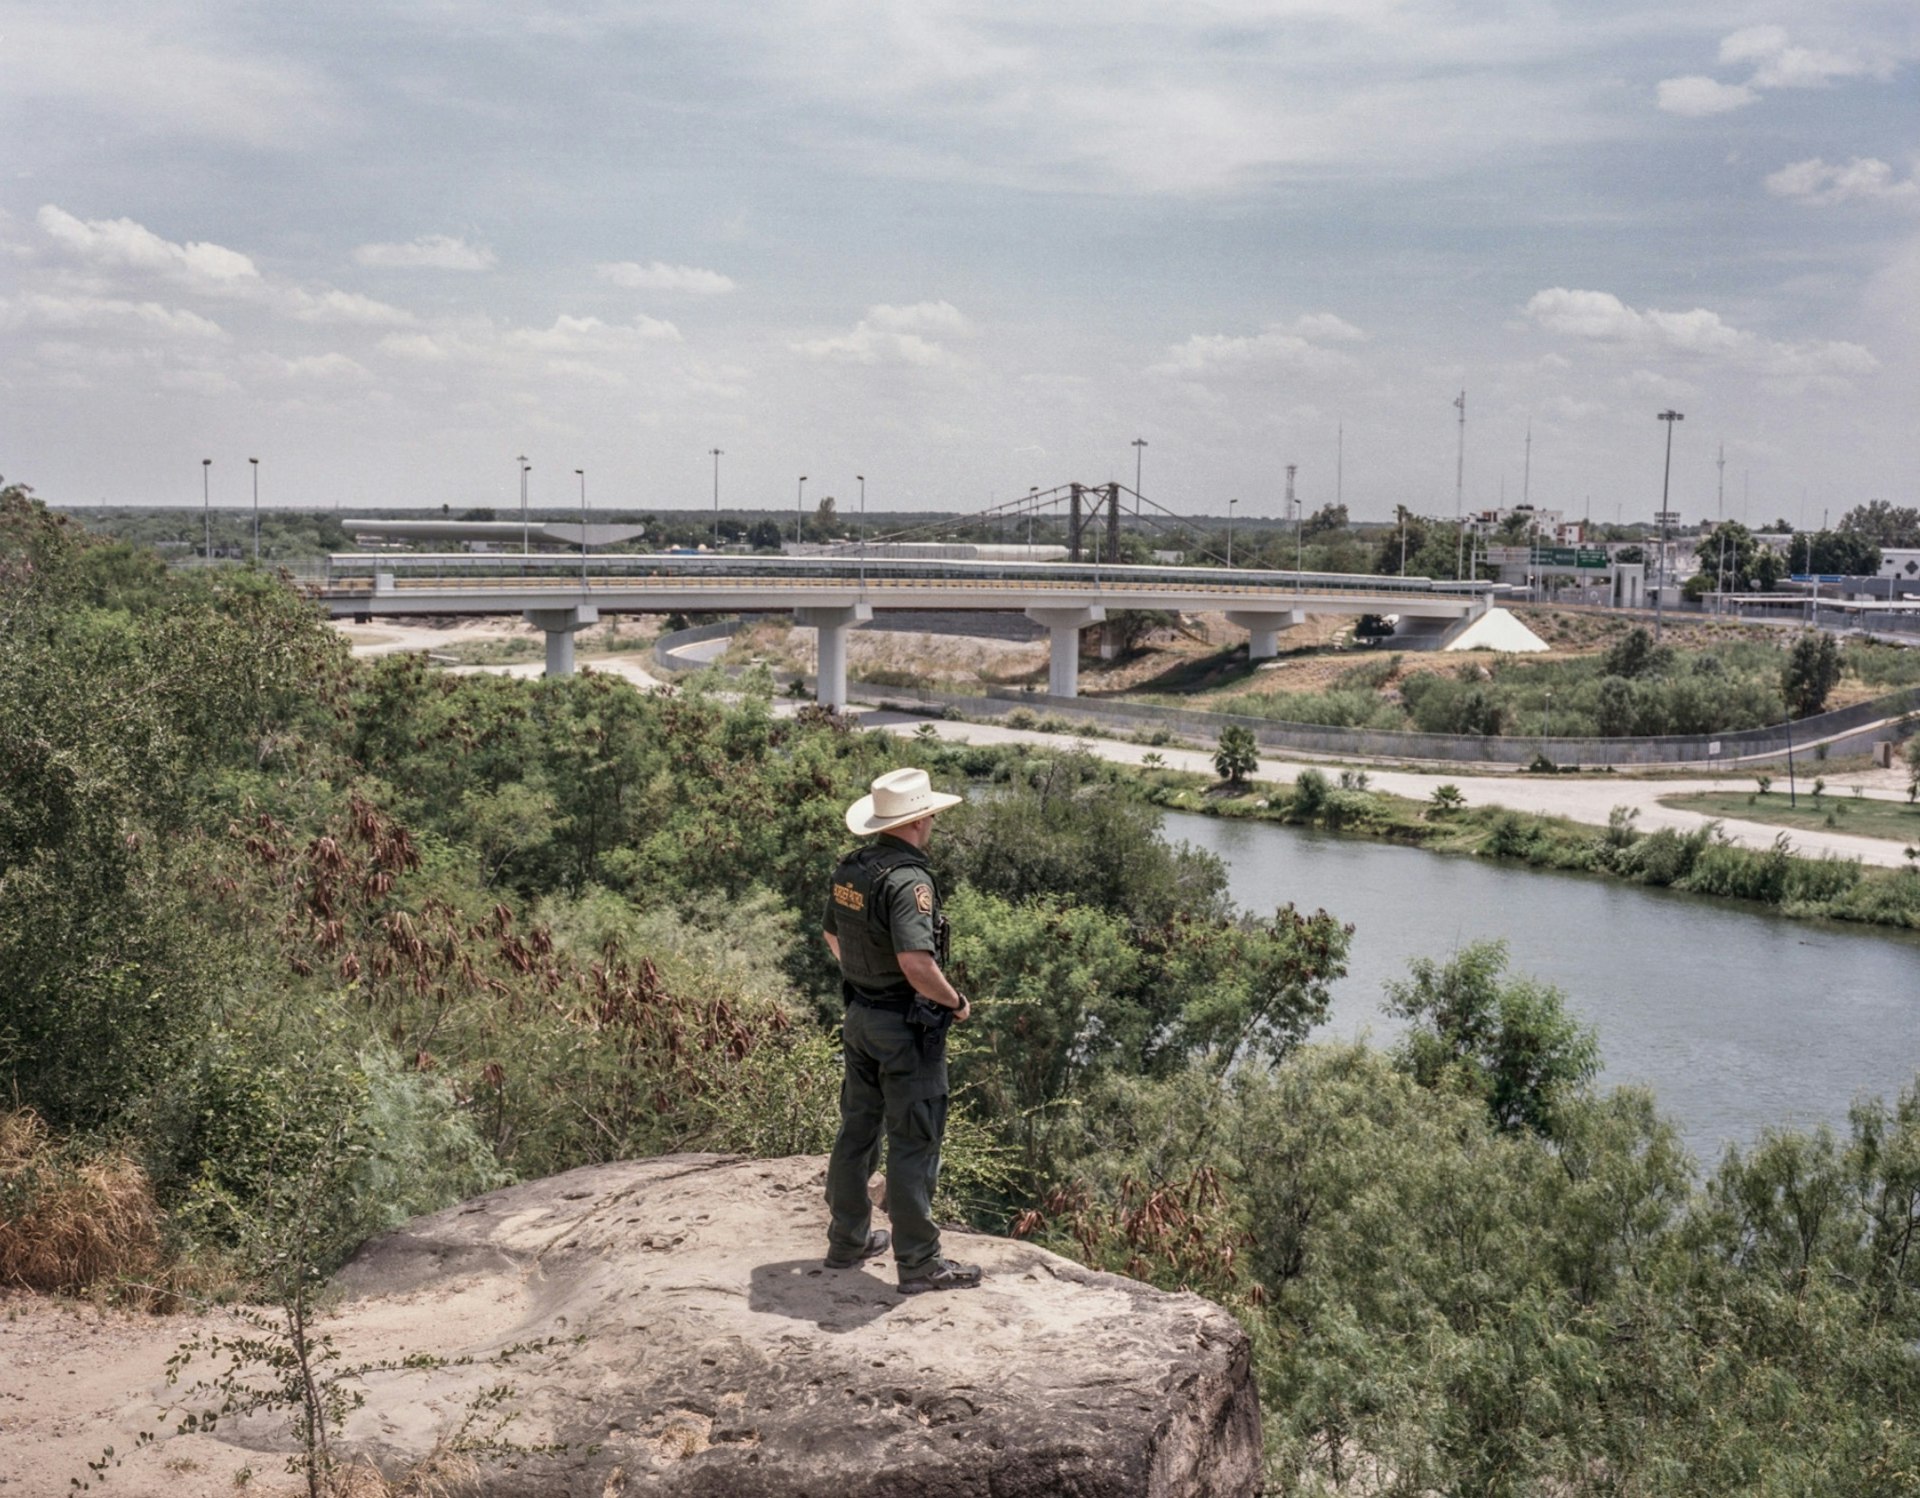 Capturing the nuances of life on the US-Mexico border